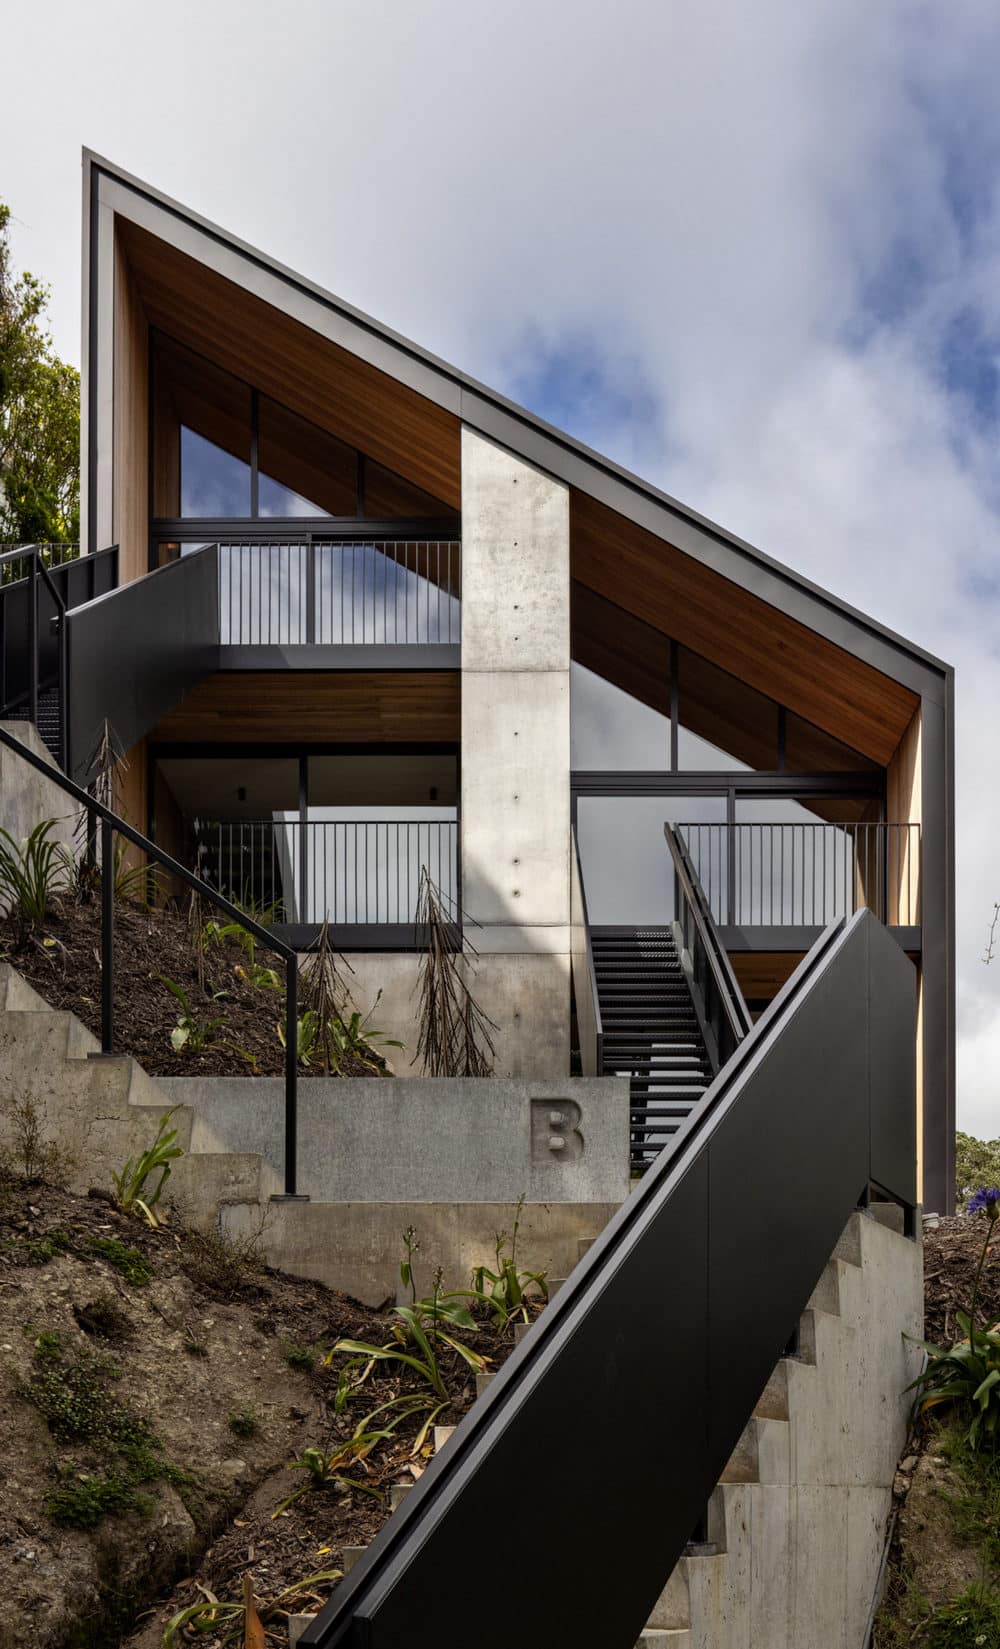 Party Wall Houses / Patchwork Architecture